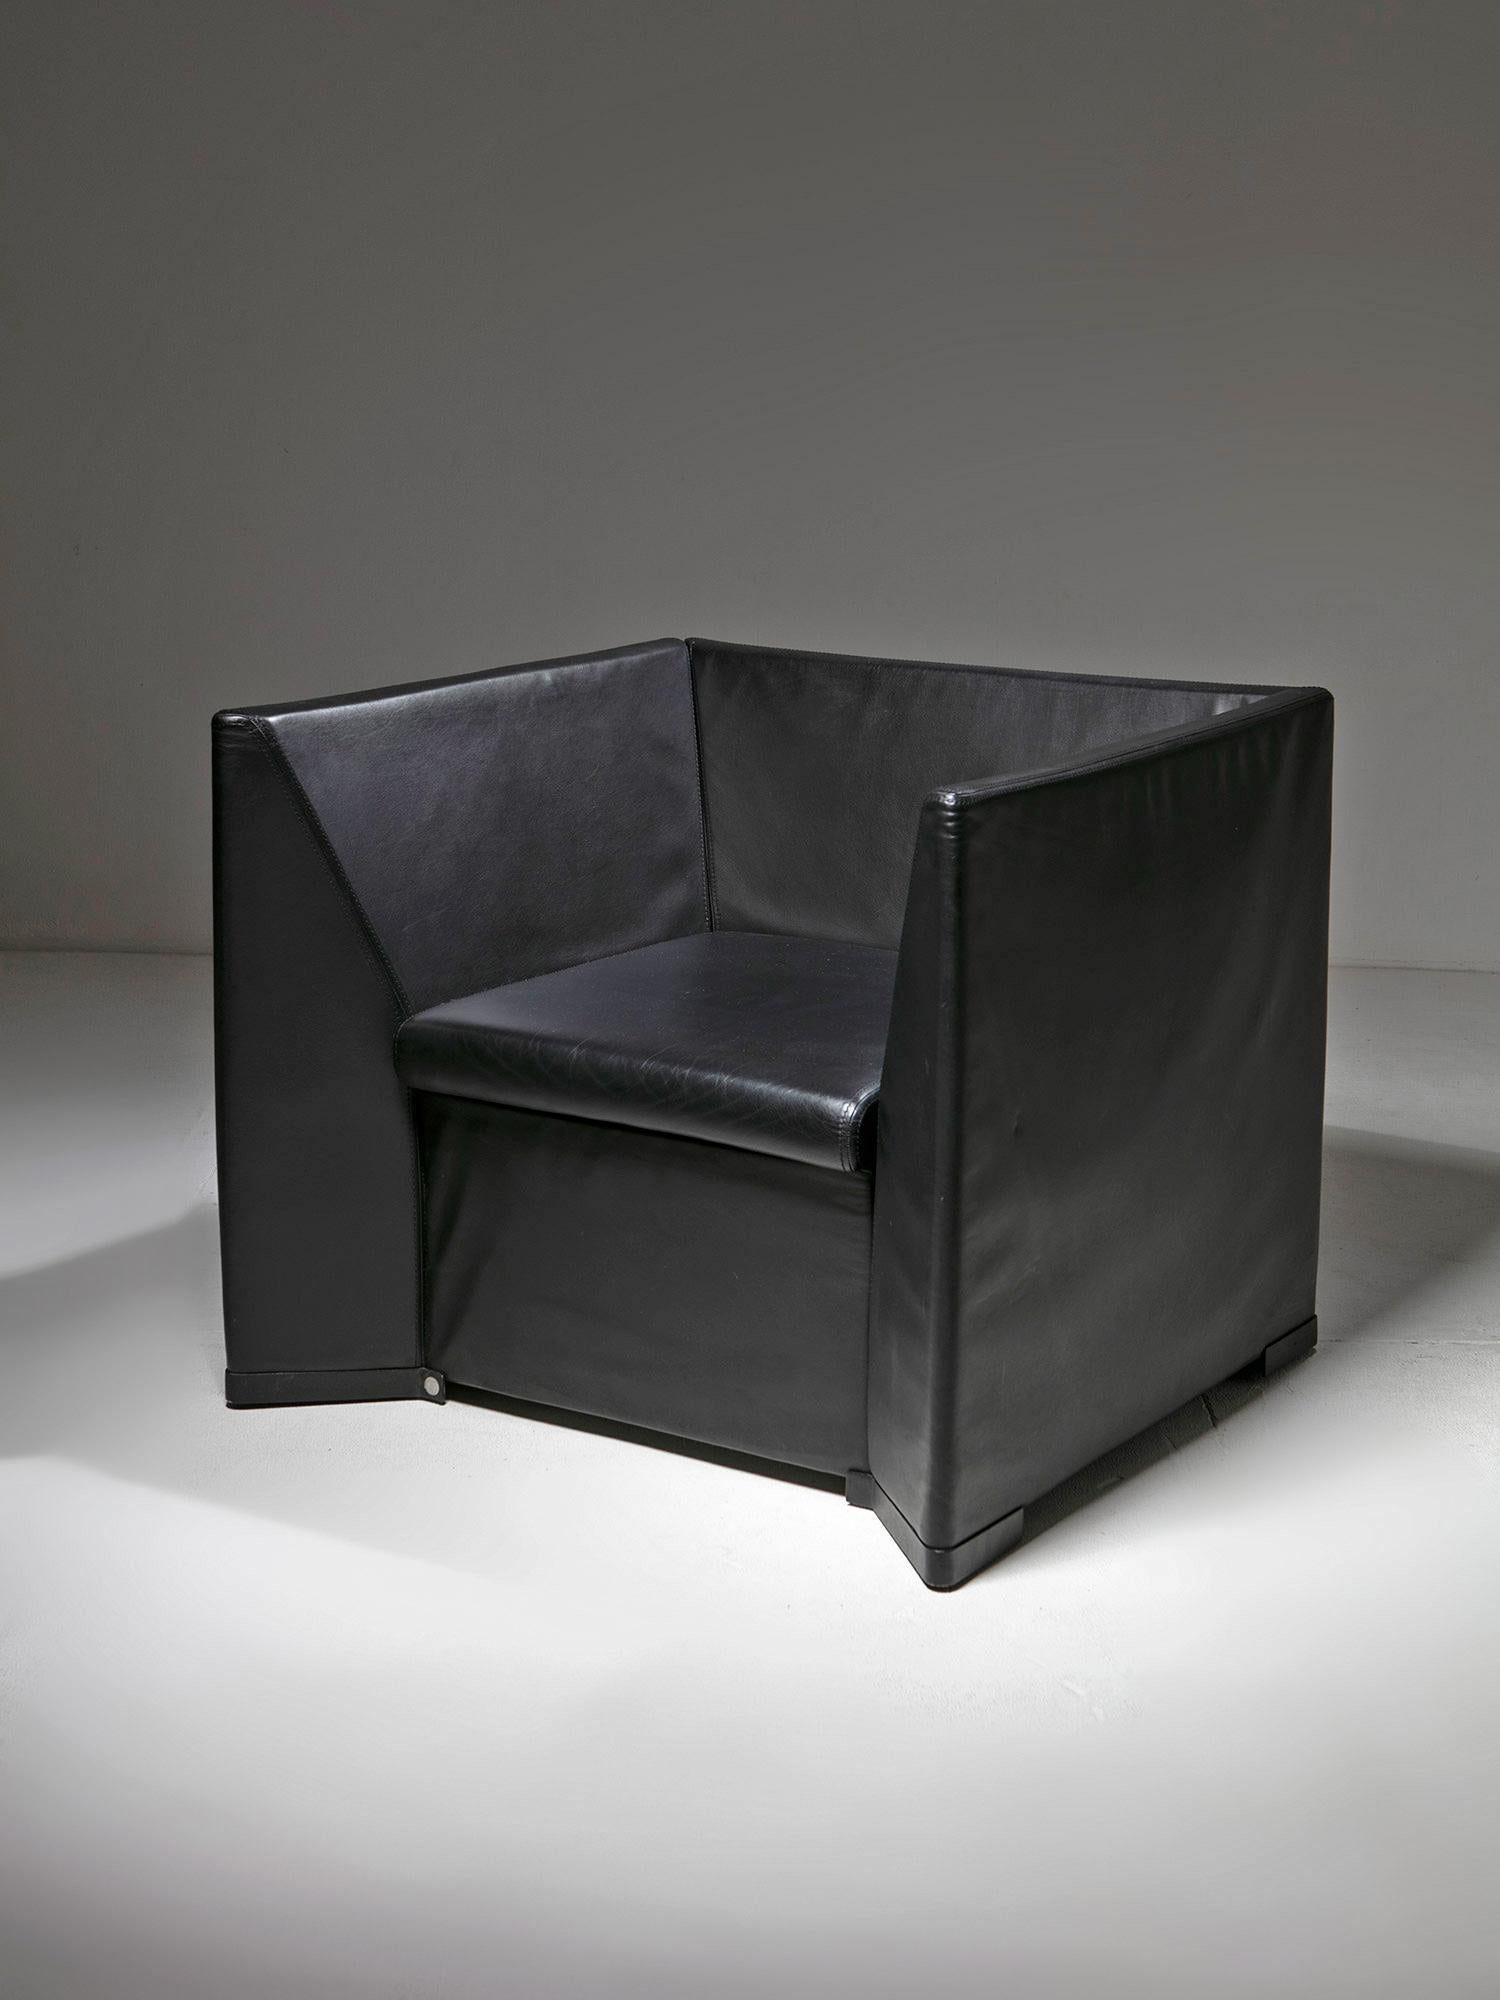 Rare leather armchair model D101 by Tecno.
Originally custom-conceived by Centro Progetti Tecno for a private bank, the model was later put in serial production.
Pure squared proportioned fully covered with black leather
